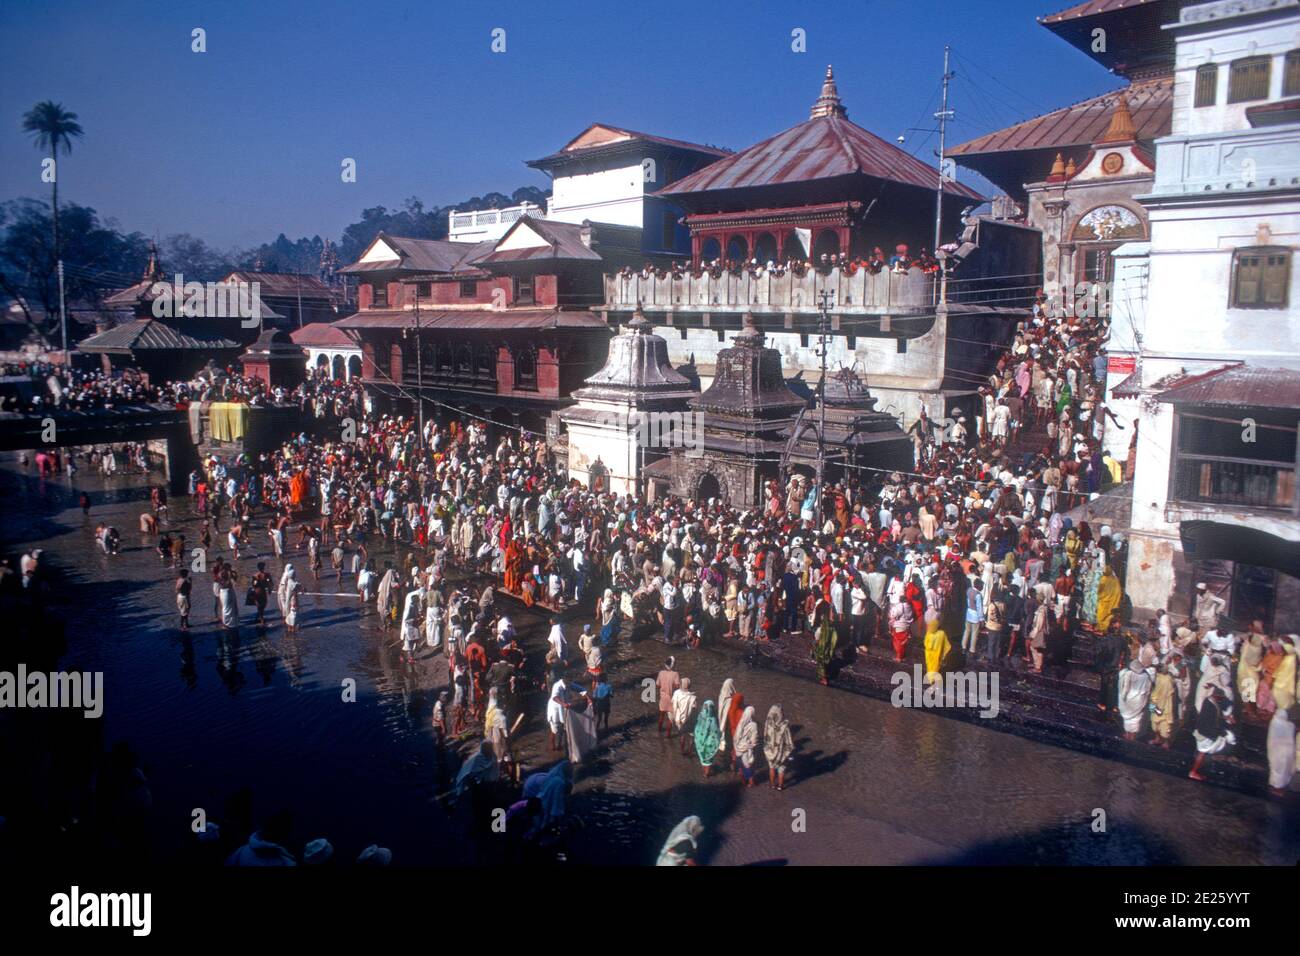 Pashupatinath Temple is a Hindi Temple dedicated to the Lord Shiva and is one of the four most important religious sites in Asia for devotees of Shiva. It was created in the 5th century and is situated on the banks of the Bagmati River. Photo taken in 1974. It is now a UNESCO World Heritage Site. Stock Photo